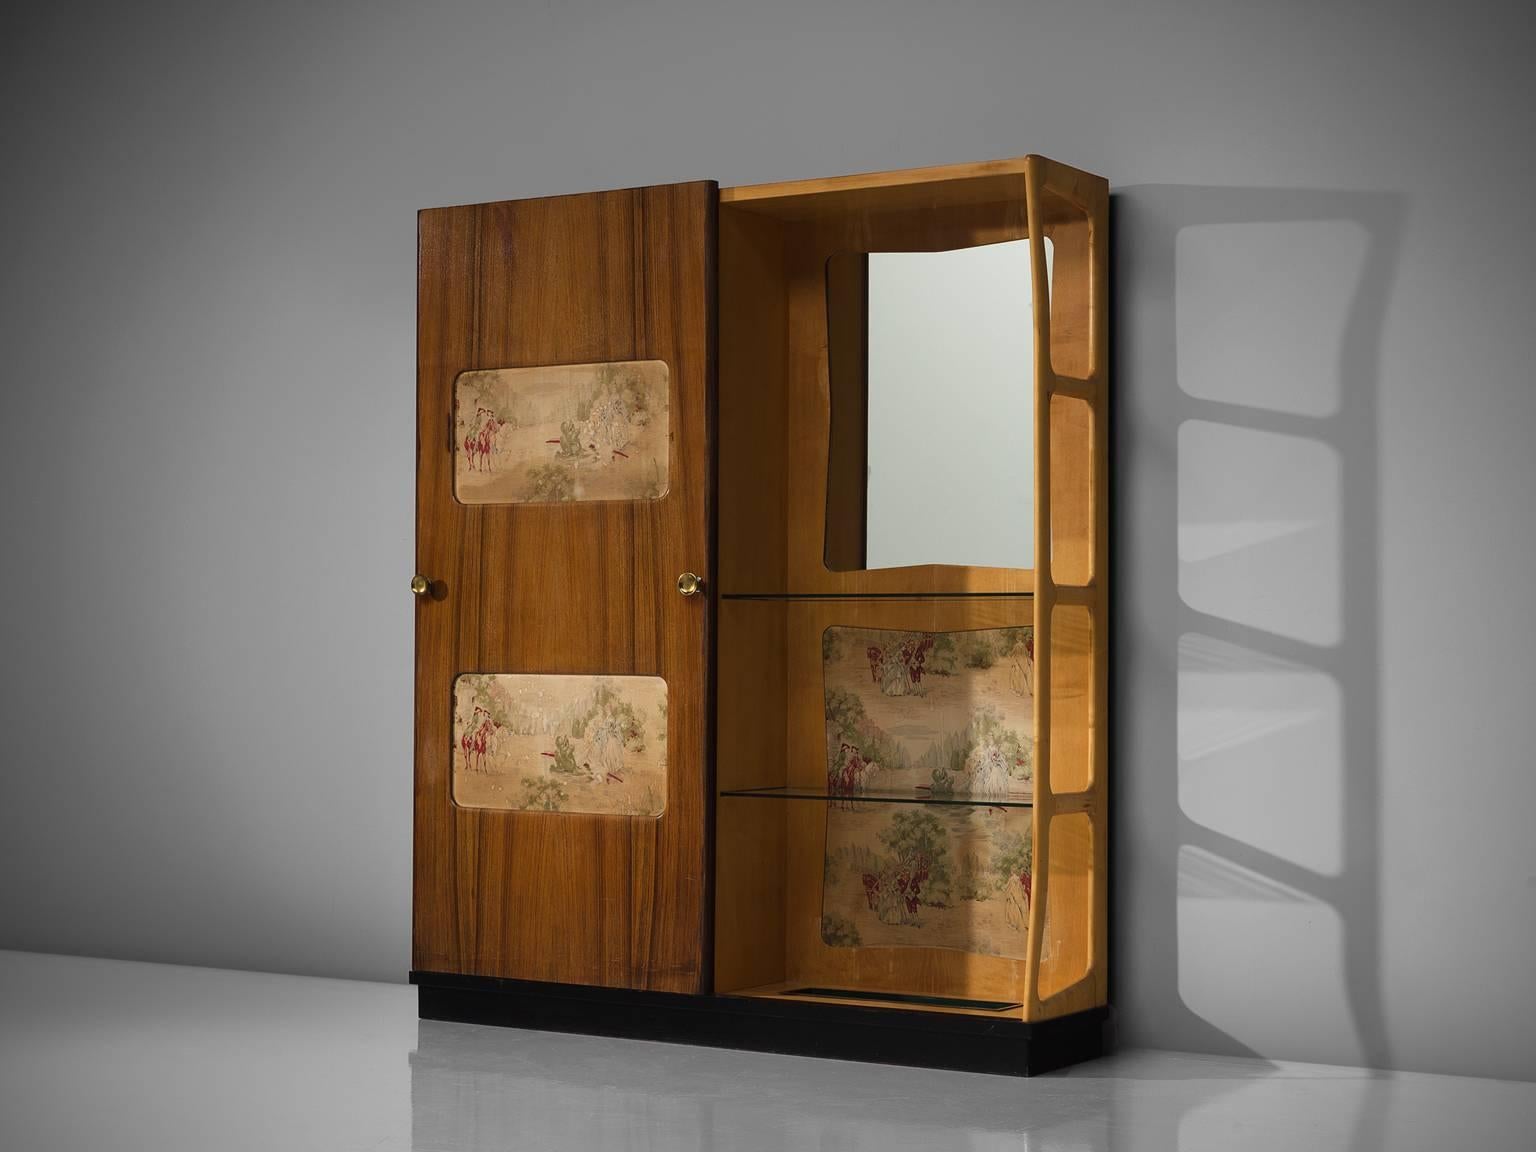 La permanente Mobile Cantu, wardrobe, wood, silk, Italy, 1950s.

Very special and typical Italian wardrobe manufactured by La permanente Mobile Cantu. The piece shows with elegant details and silk artwork in the door and the back panel. The large